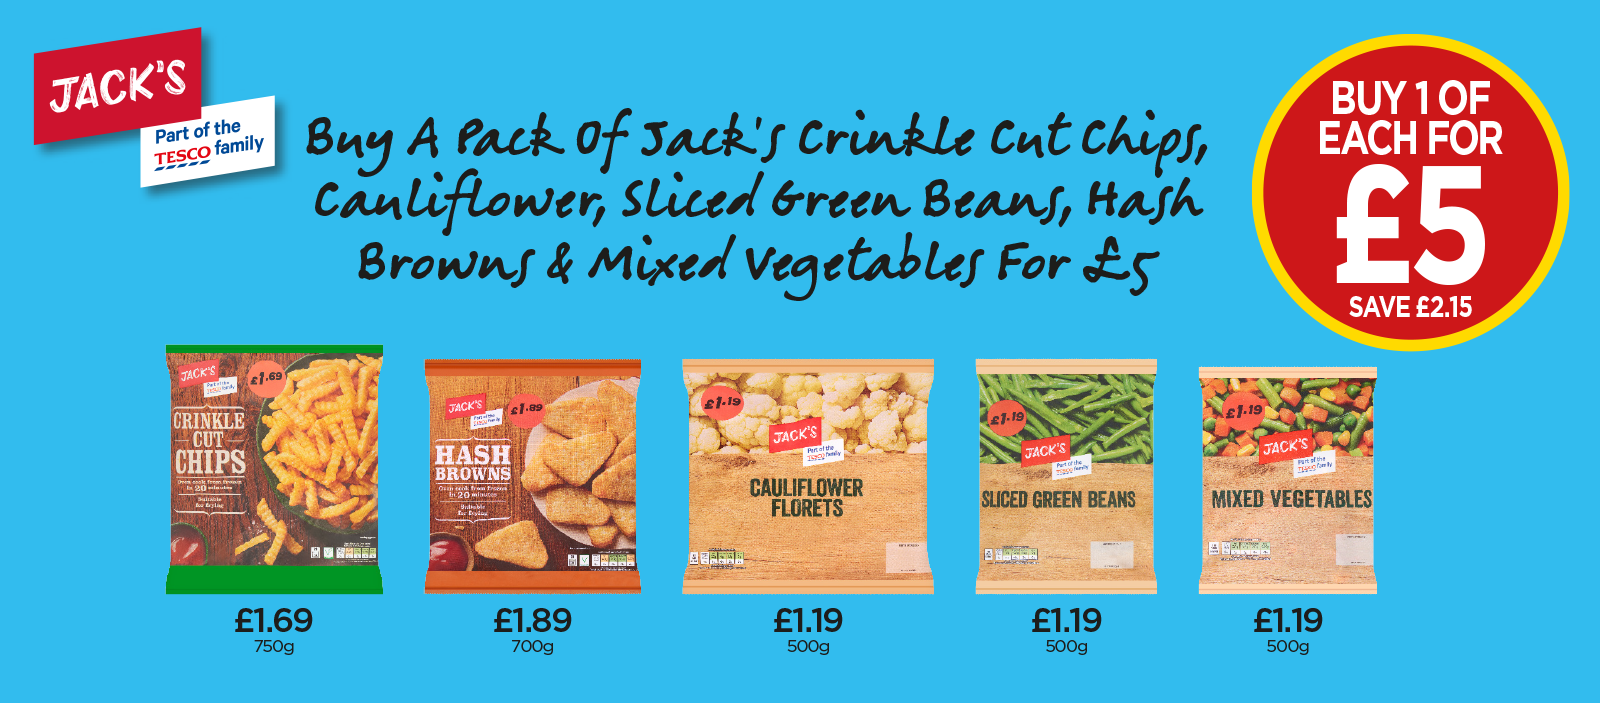 Jack's Crinkle Cut Chips, Hash Browns, Cauliflower Florets, Sliced Green Beans, Mixed Vegetables - Buy A Pack Of Jack's Crinkle Cut Chips, Cauliflower, Sliced Green Beans, Hash Browns & Mixed Vegetables for £5 at Budgens